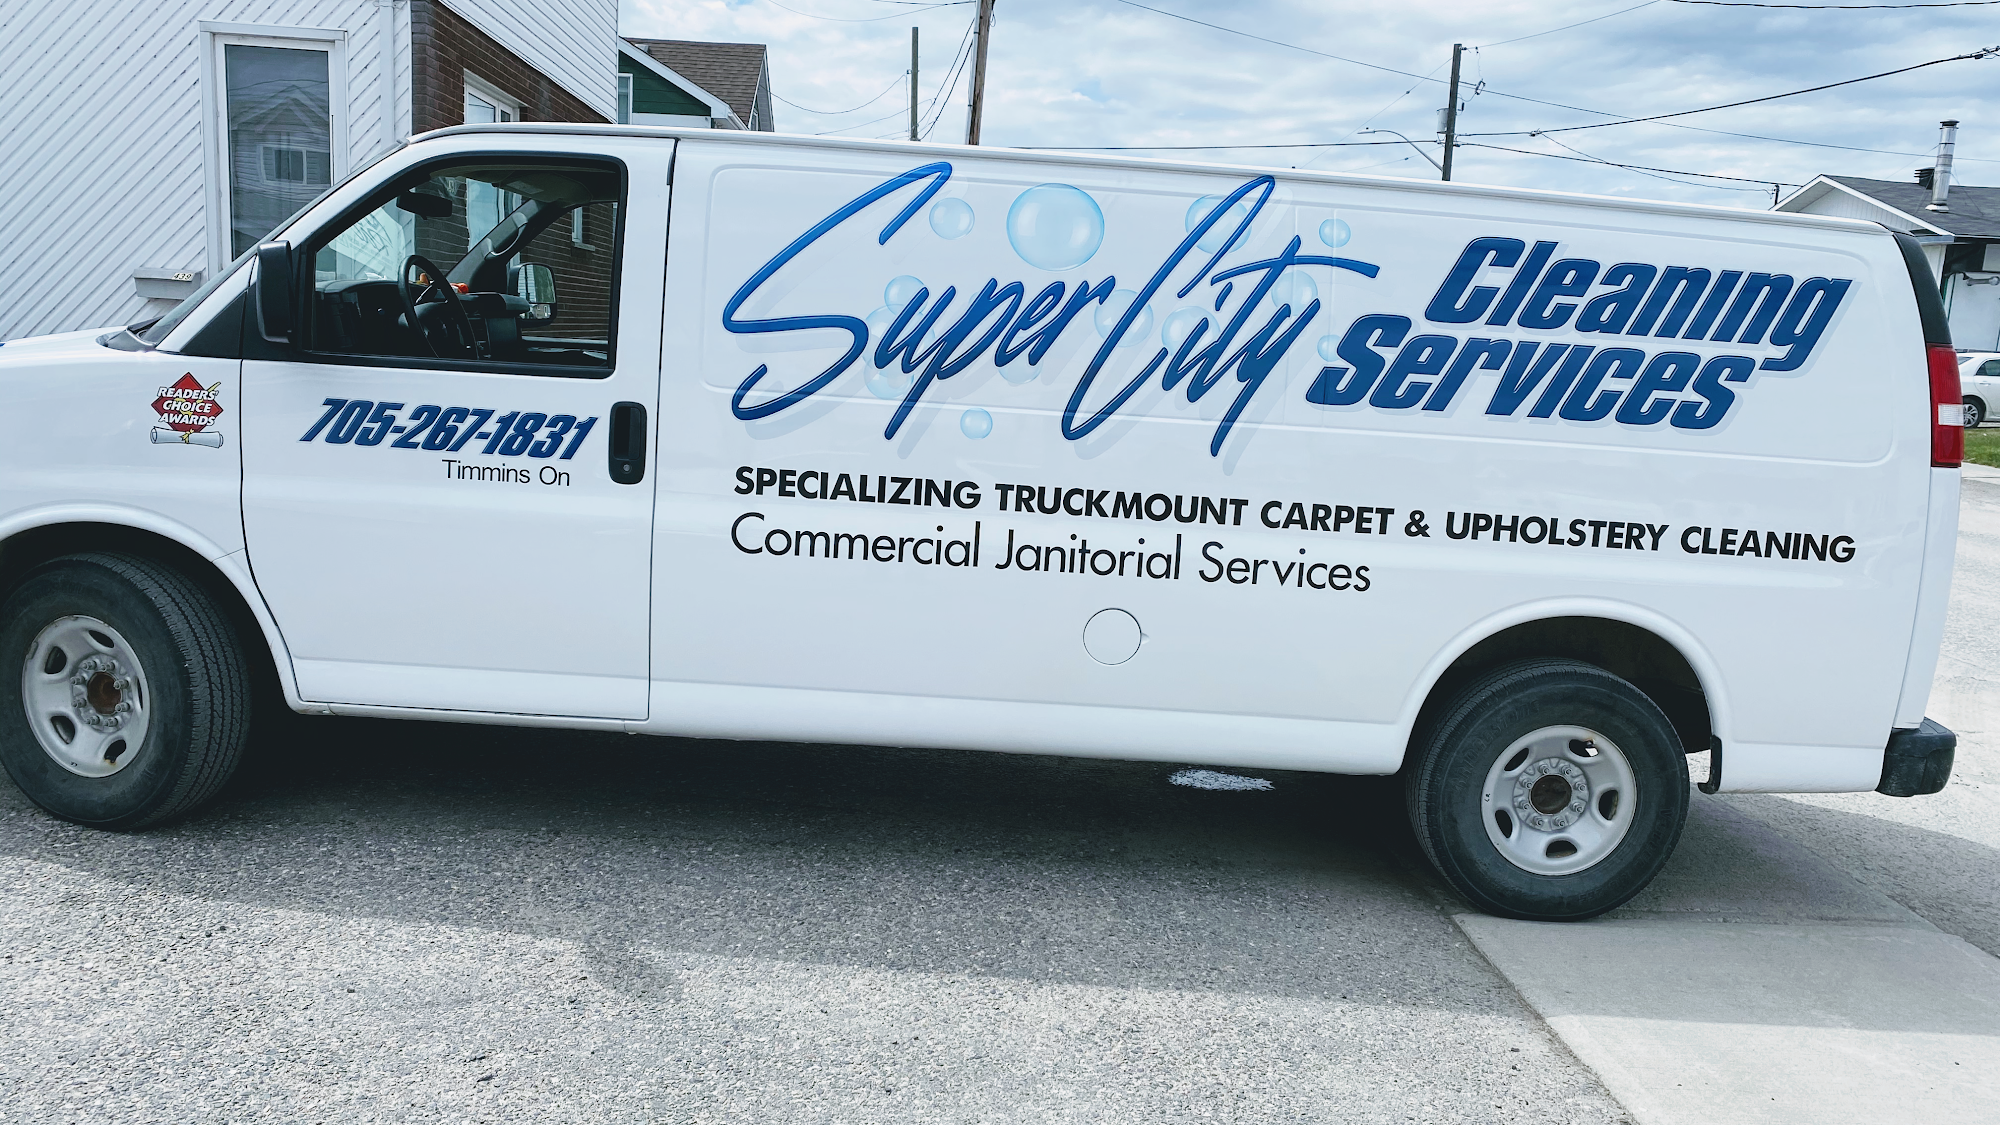 Super City Cleaning Services 433 Oak Ave, Timmins Ontario P4N 1A6